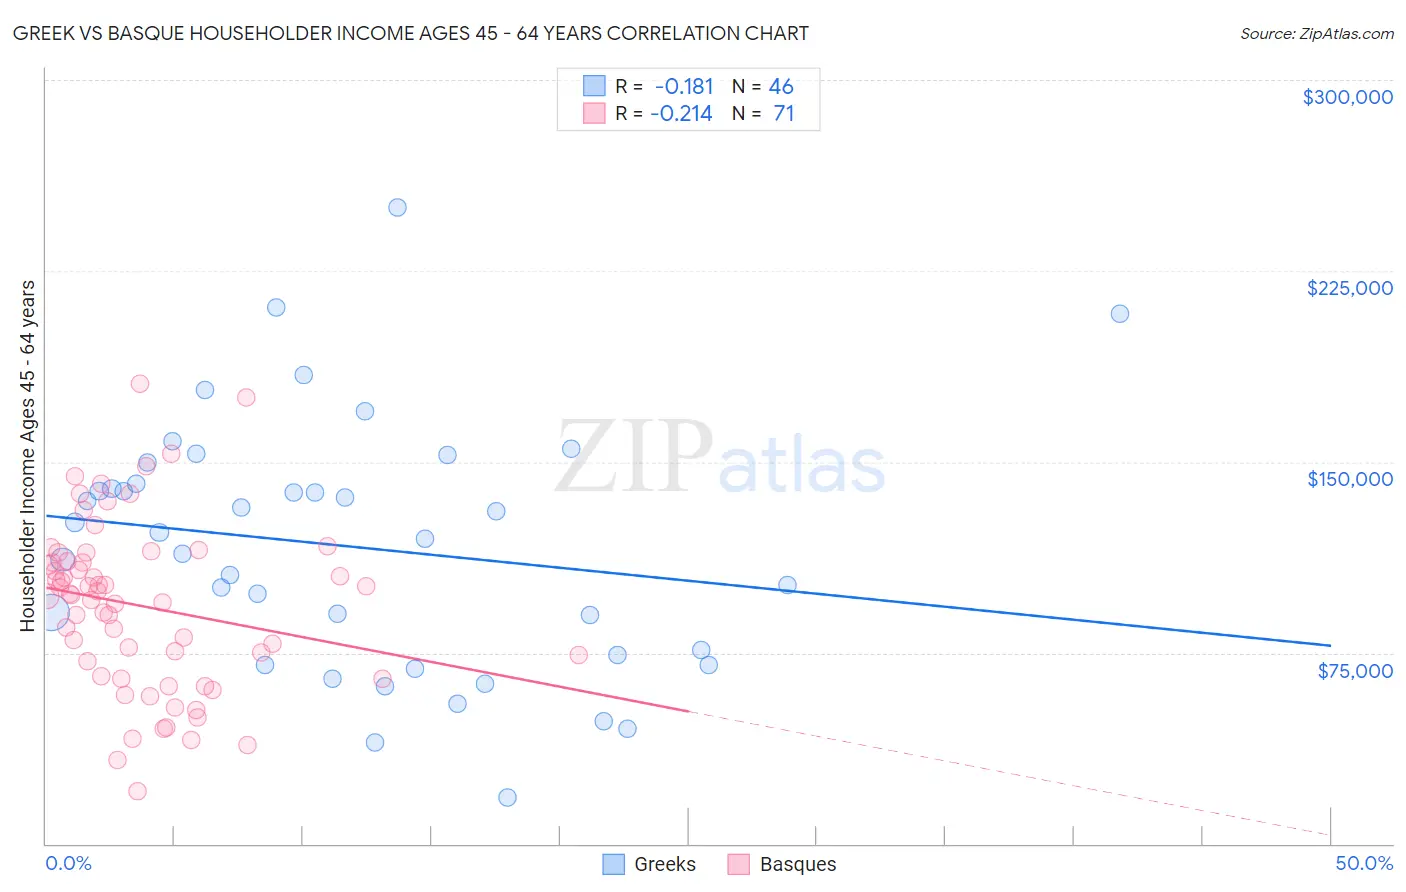 Greek vs Basque Householder Income Ages 45 - 64 years